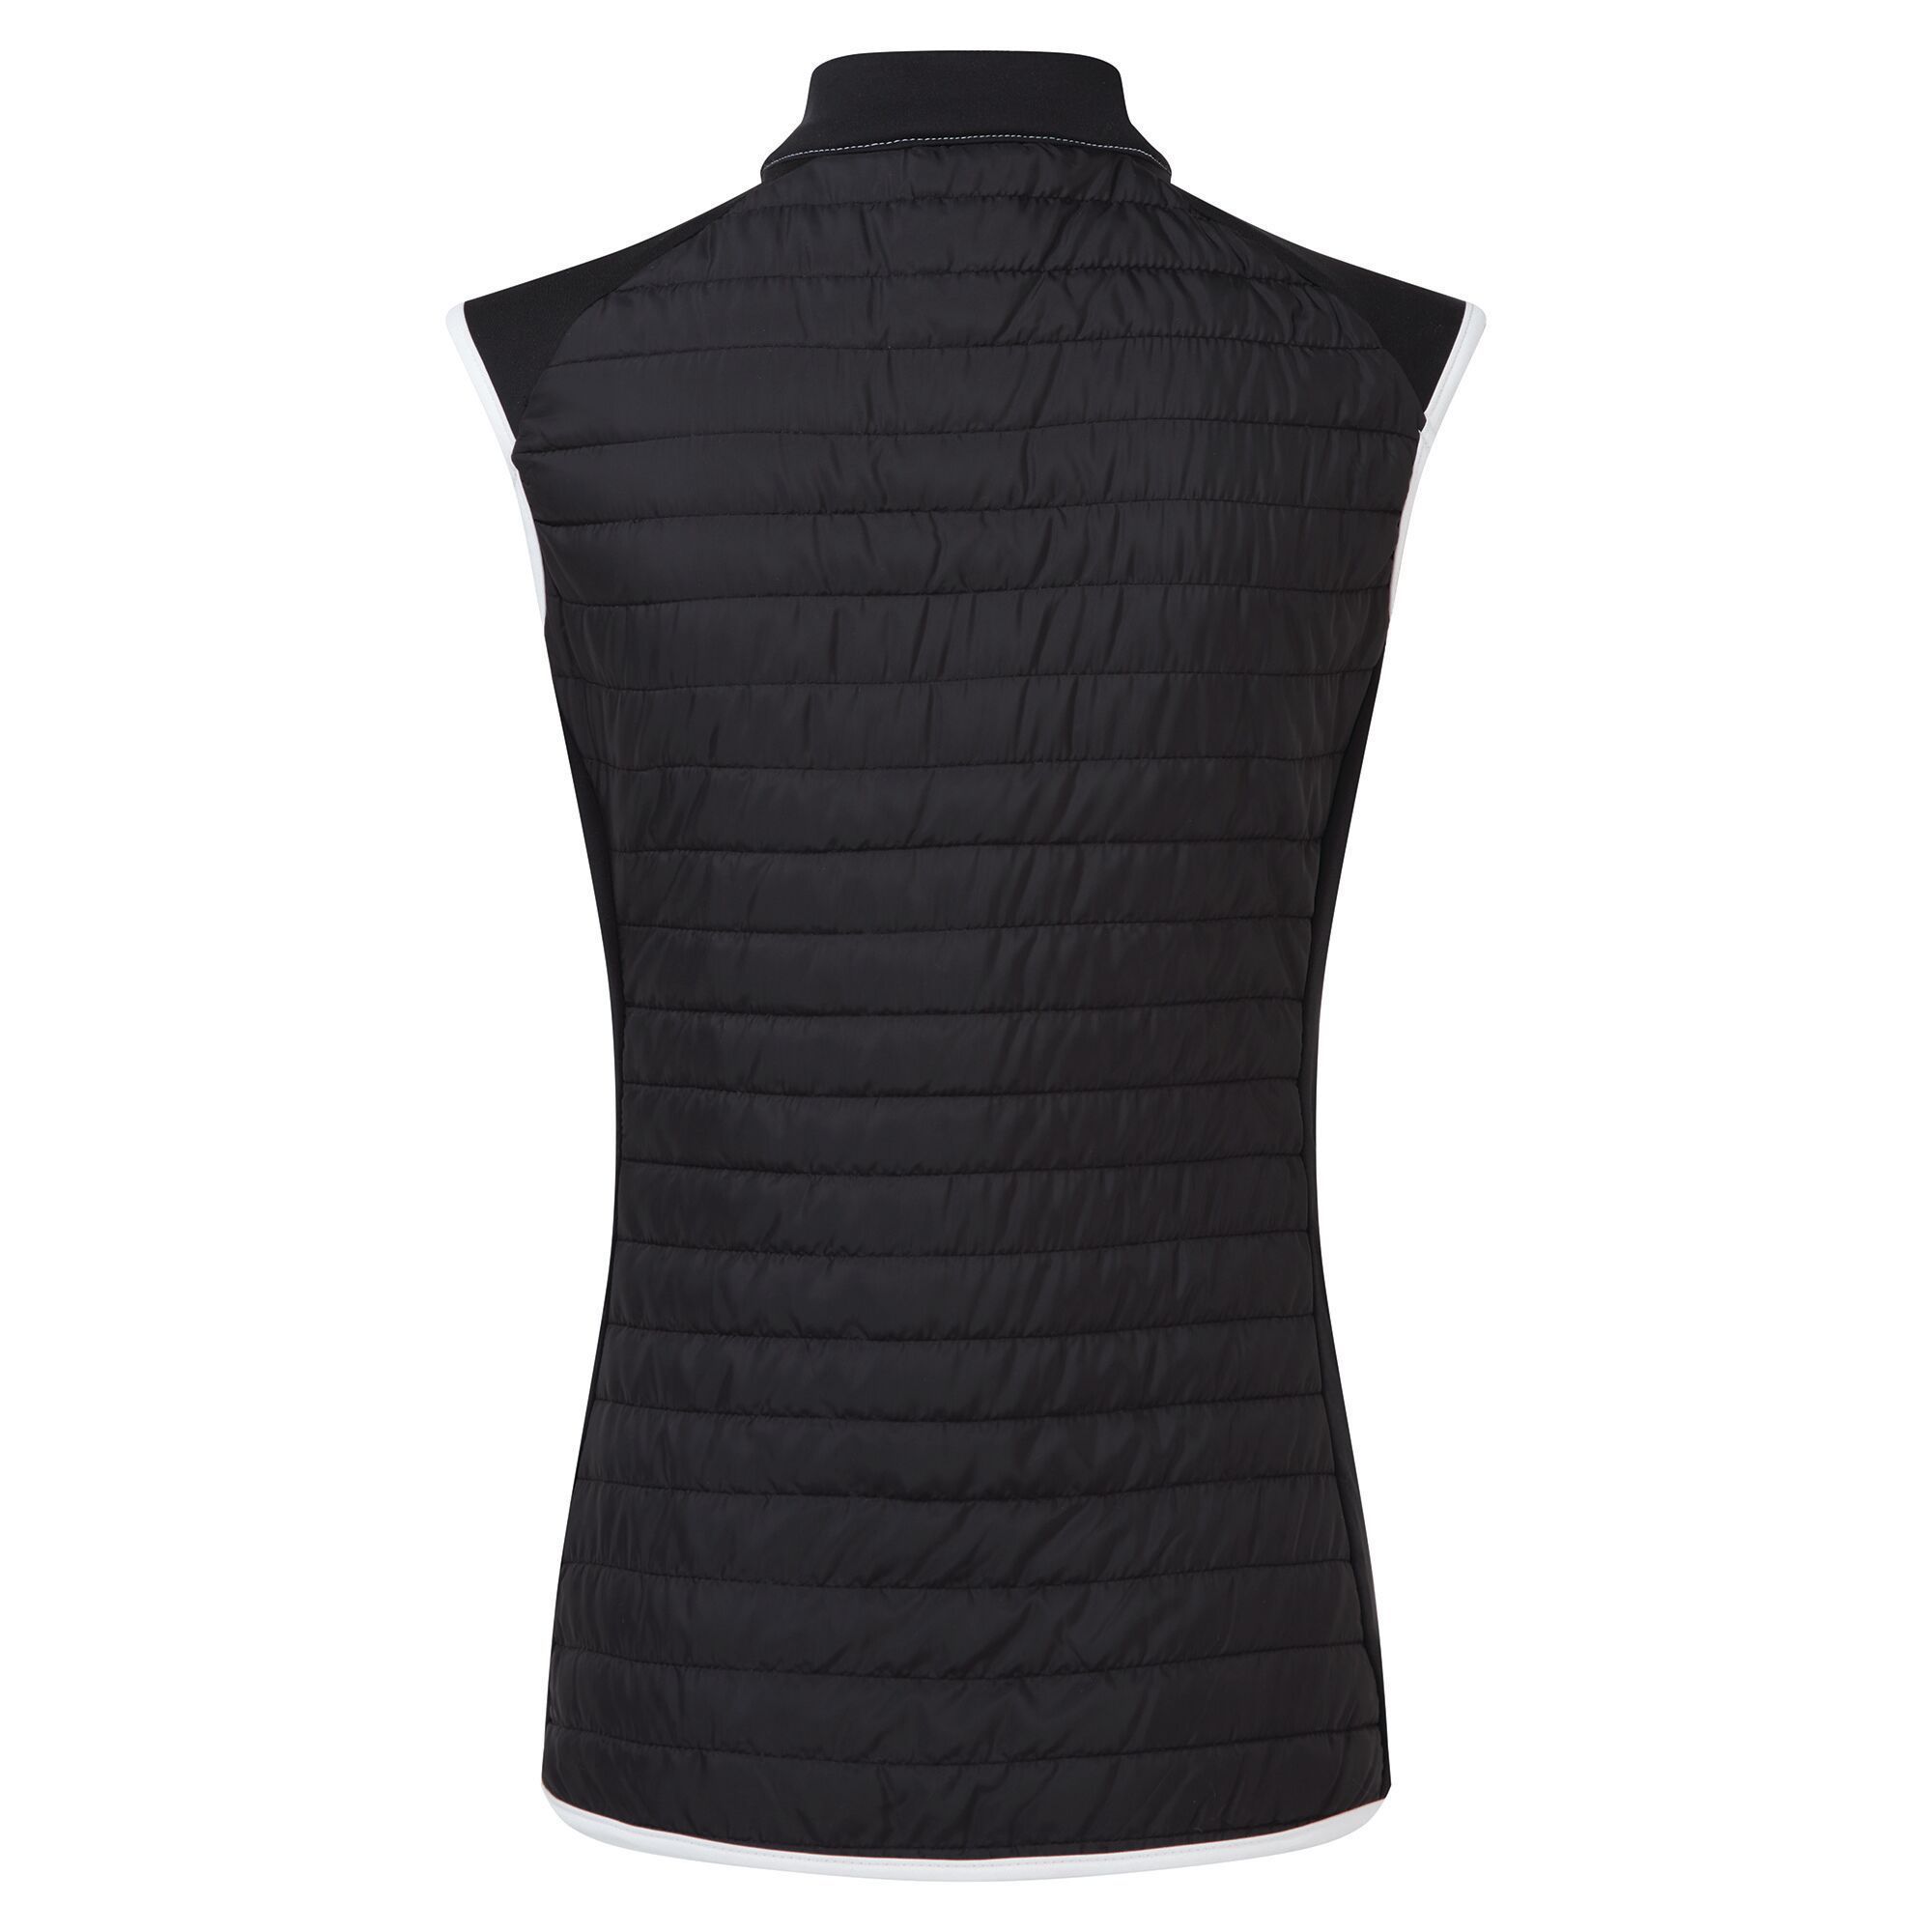 Outer Materials: 100% Polyester. Fabric: Ripstop. Filling Material: 50% Merino Wool, 50% Polyester. Design: Colour Block. Fabric Technology: Anti-Bacterial, Anti-Odour, Iloft Woolfill, Moisture Wicking, Quick Dry, Water Repellent. Stretch Binding. Neckline: High-Neck. Sleeve-Type: Sleeveless. Pockets: 2 Lower Pockets. Fastening: Full Zip.